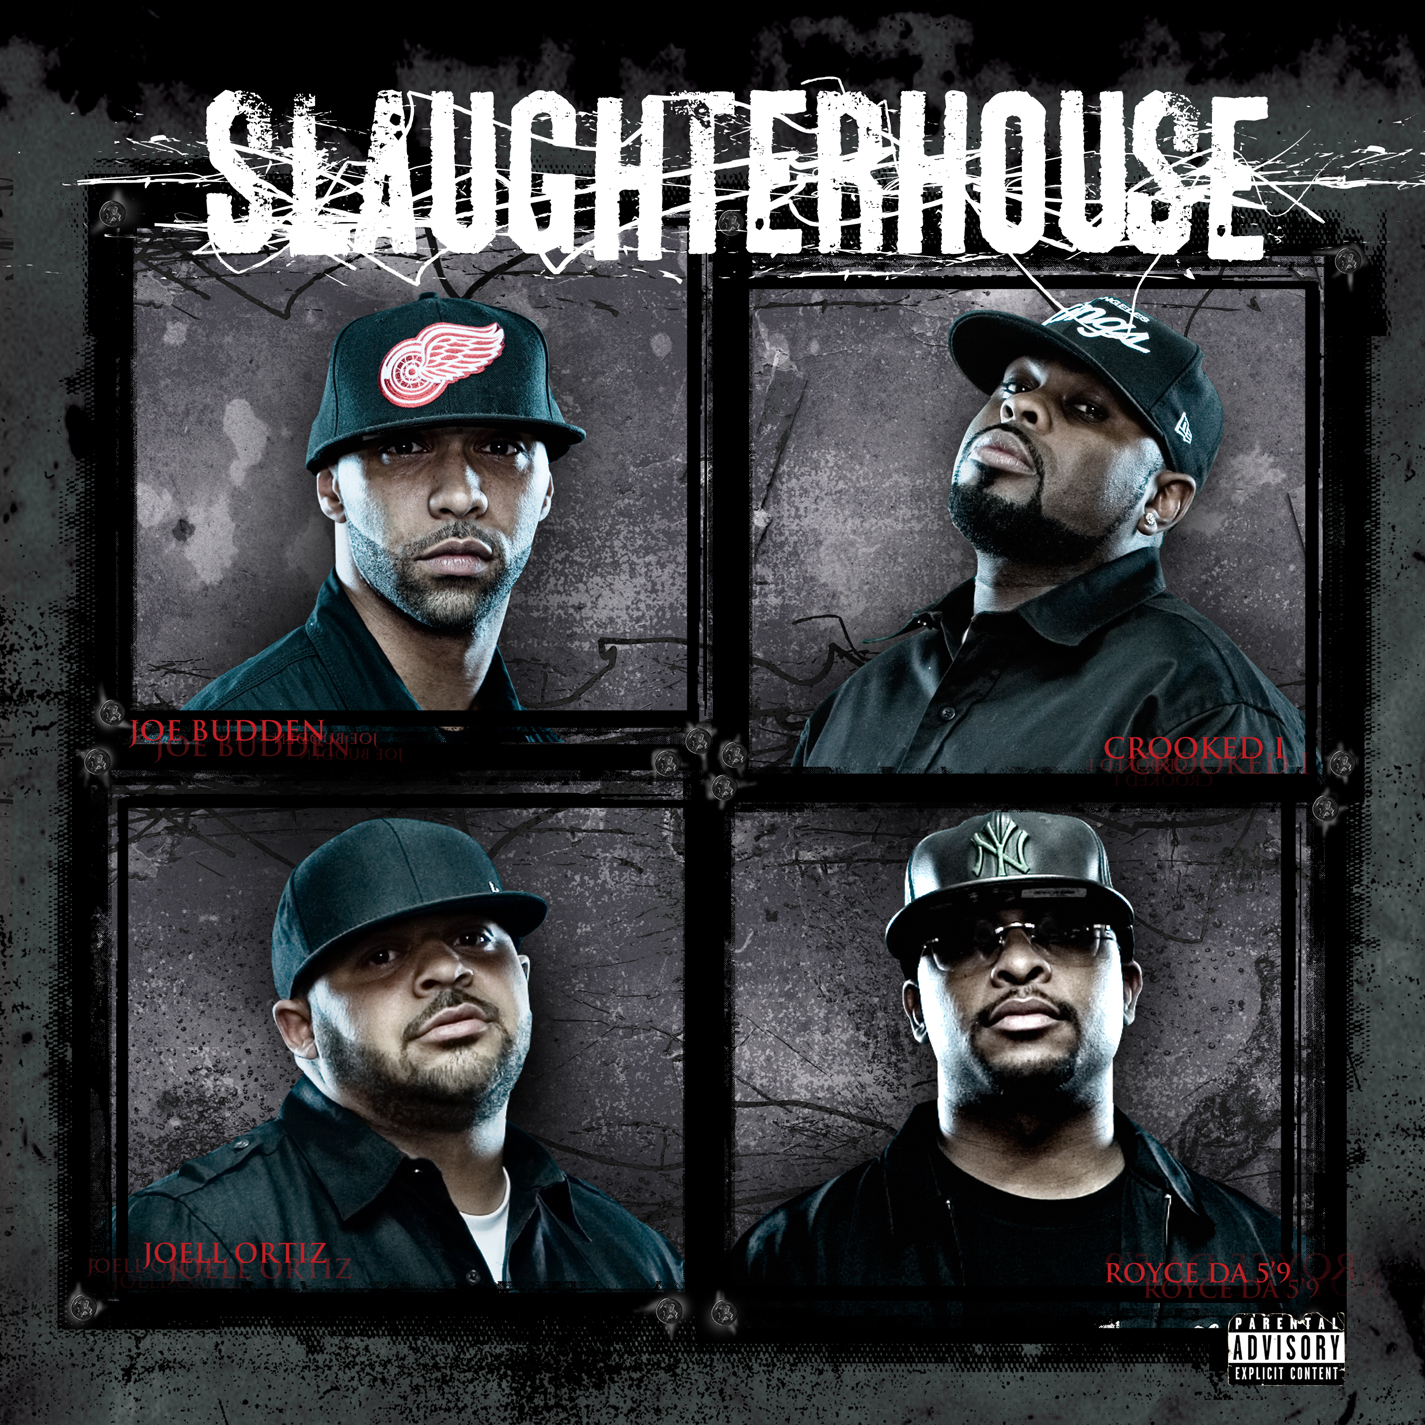 slaughterhouse-my-life-ft-cee-lo-prod-by-phillys-own-sarom-street-runner-2012 Slaughterhouse - My Life Ft. Cee-Lo (Prod by Philly's own Sarom & Street Runner)  